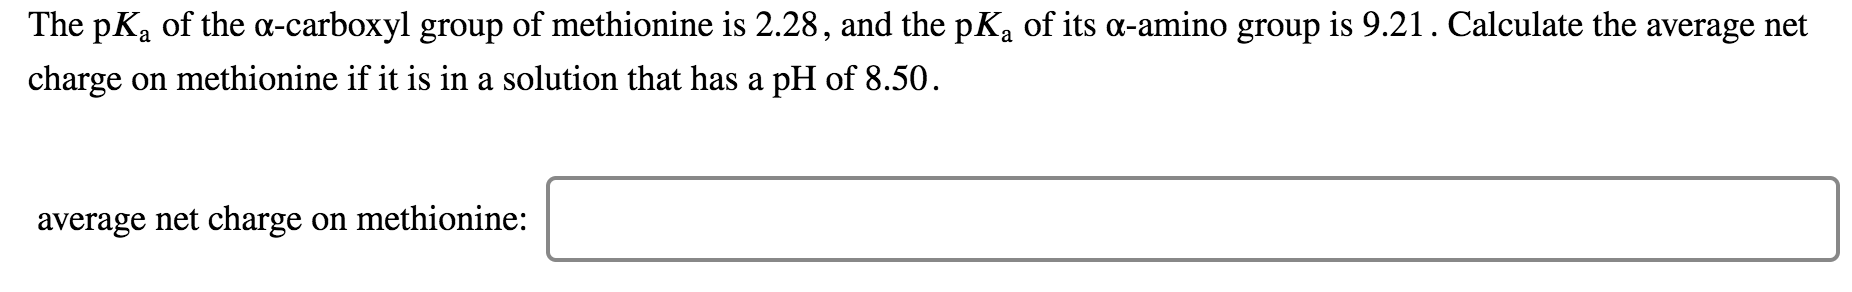 The pKa of the a-carboxyl group of methionine is 2.28, and the pKa of its a-amino group is 9.21. Calculate the average net
charge on methionine if it is in a solution that has a pH of 8.50
average net charge on methionine:
